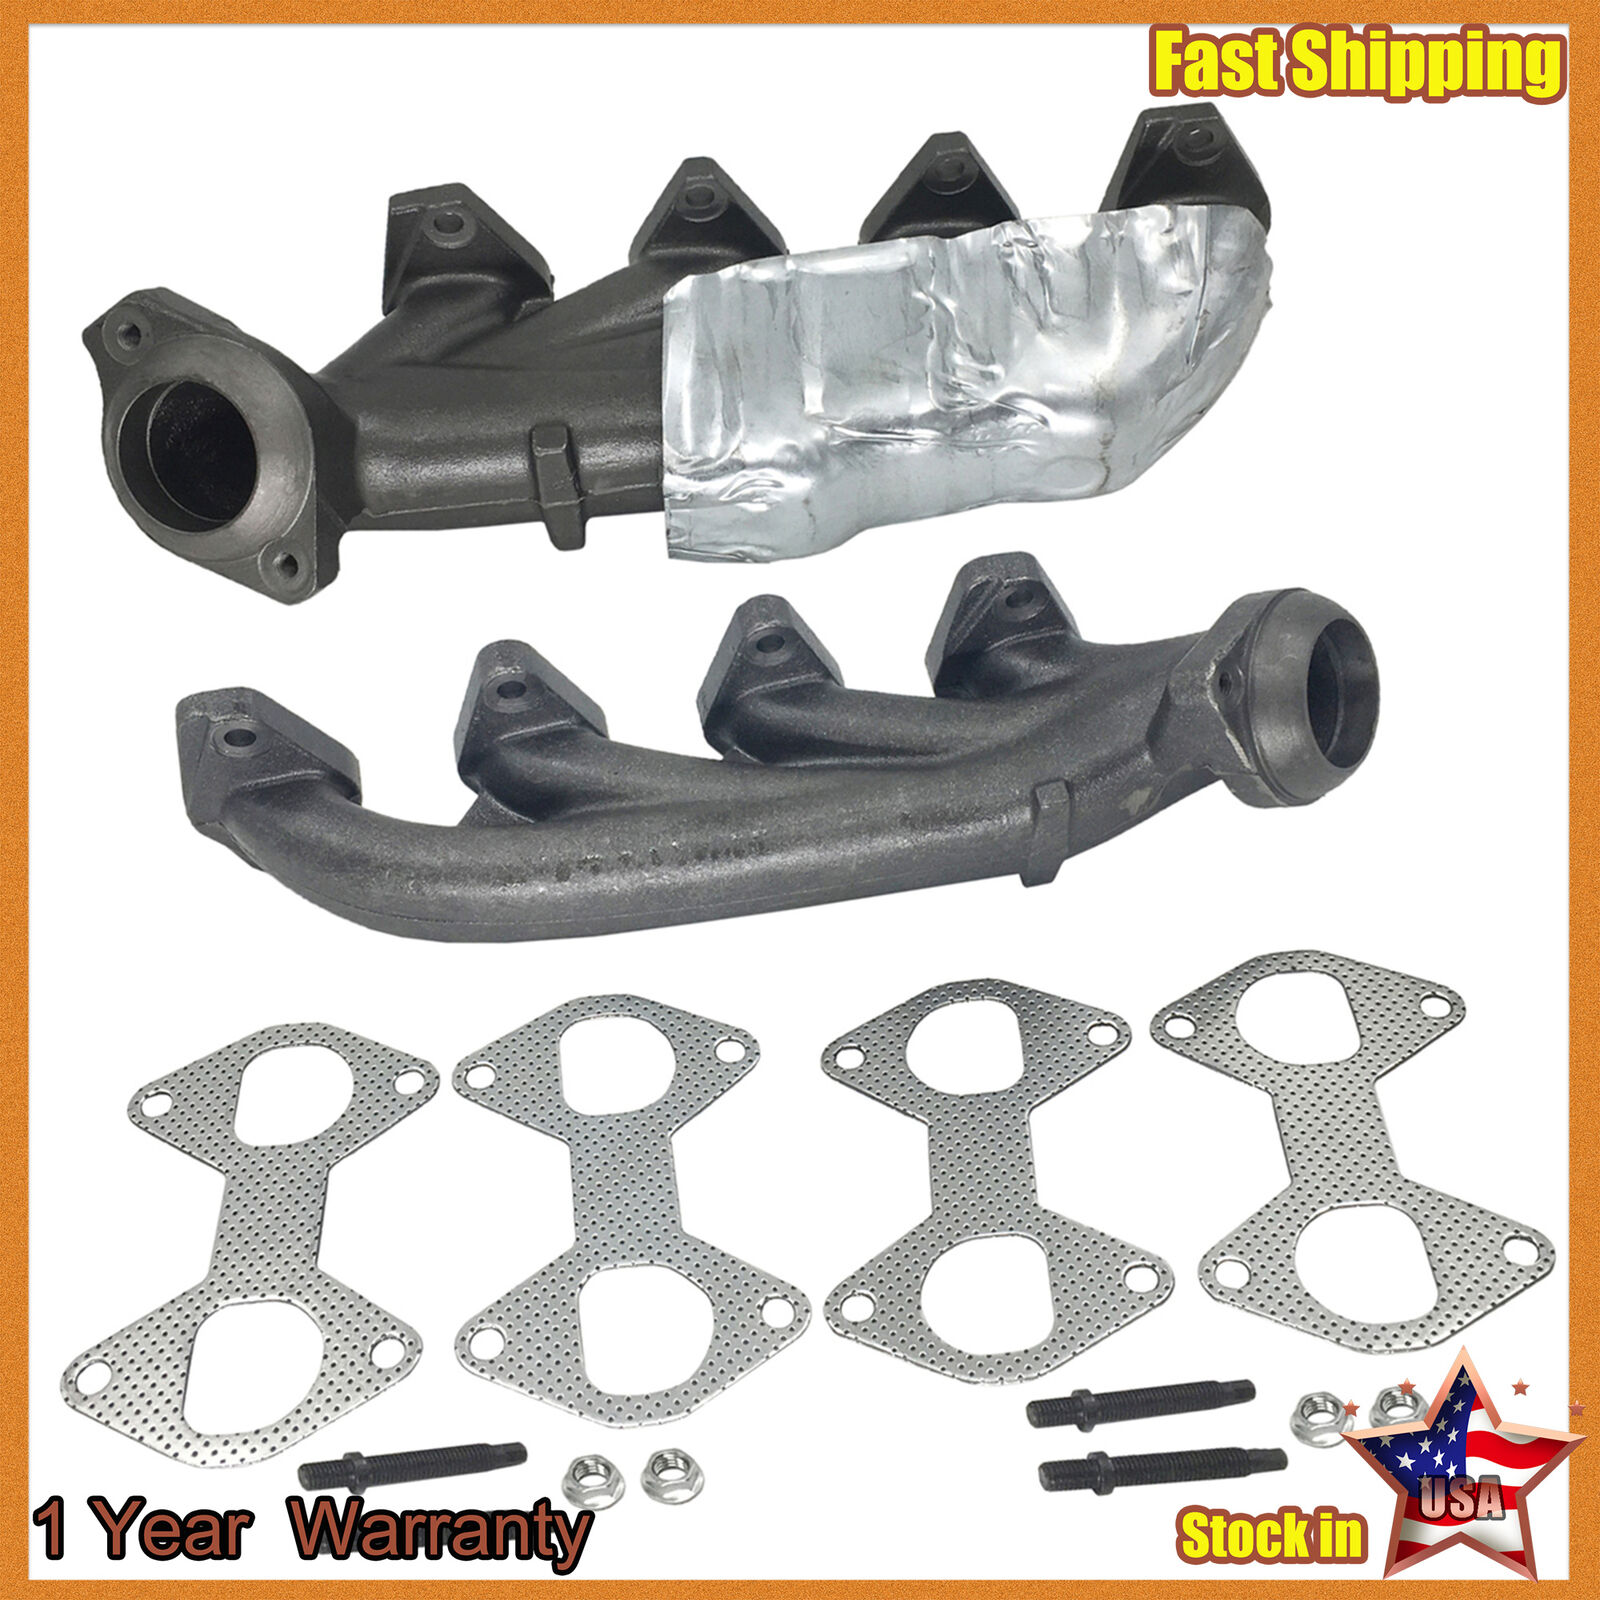 Pairs of Exhaust Manifold & Gasket Kit Fit 04-09 Ford F150 Truck 674-694 674-695